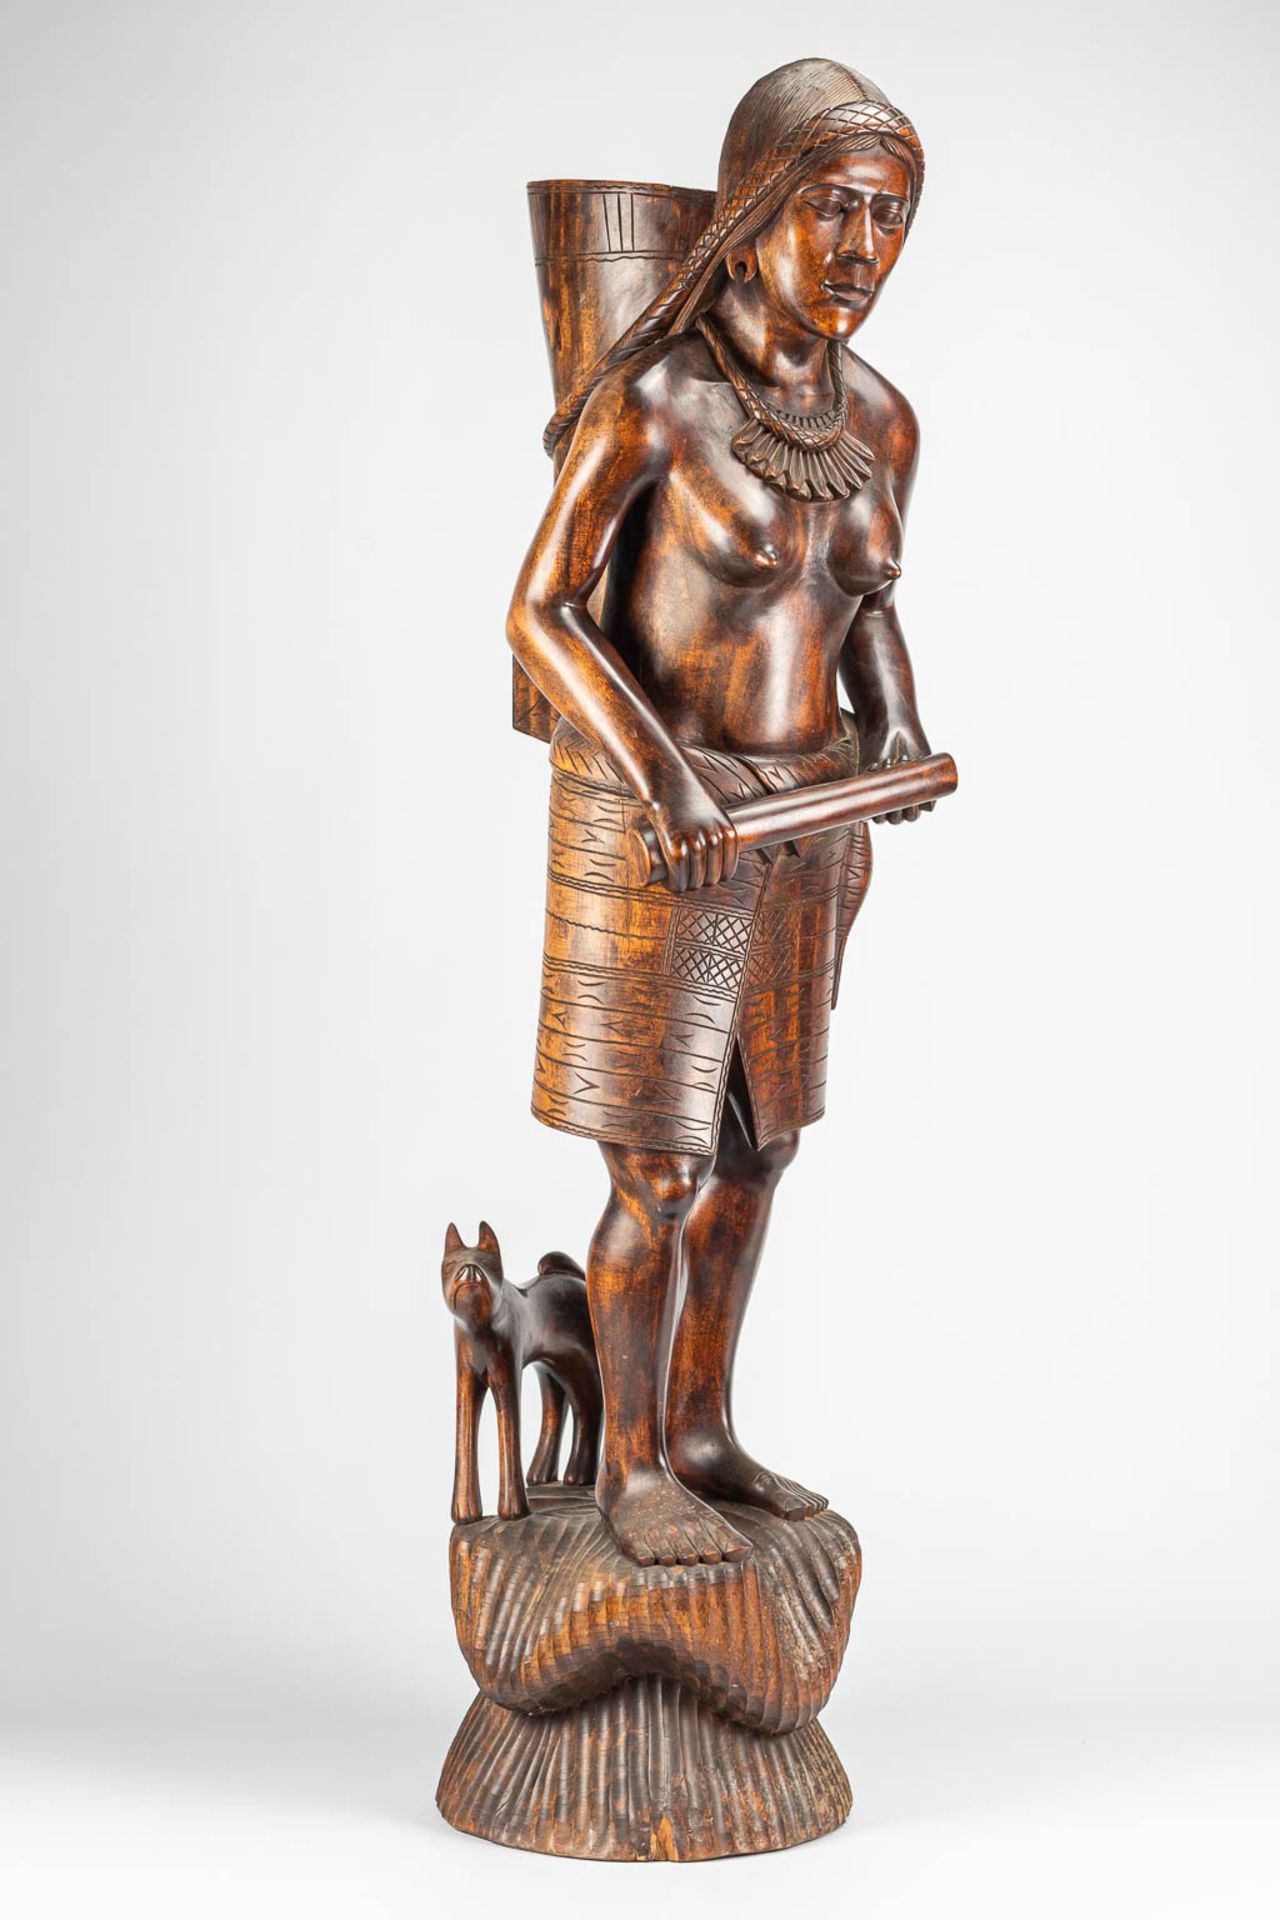 A large statue of an African woman, made of sculptured wood. - Image 3 of 8